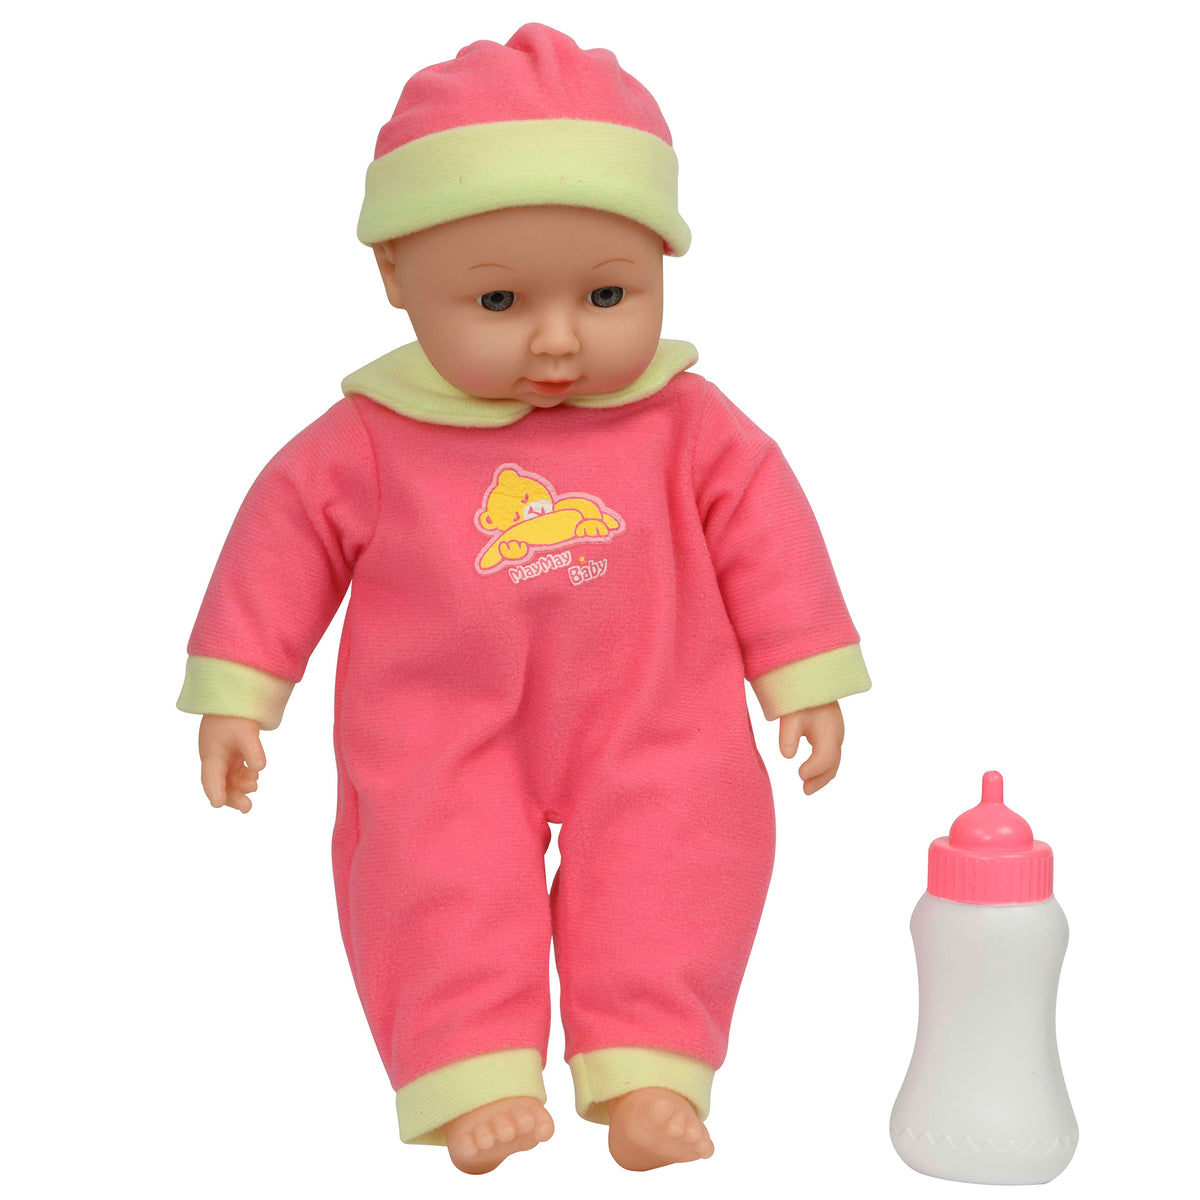 BabyBoo Bed Time Baby Doll with Bottle - Pink